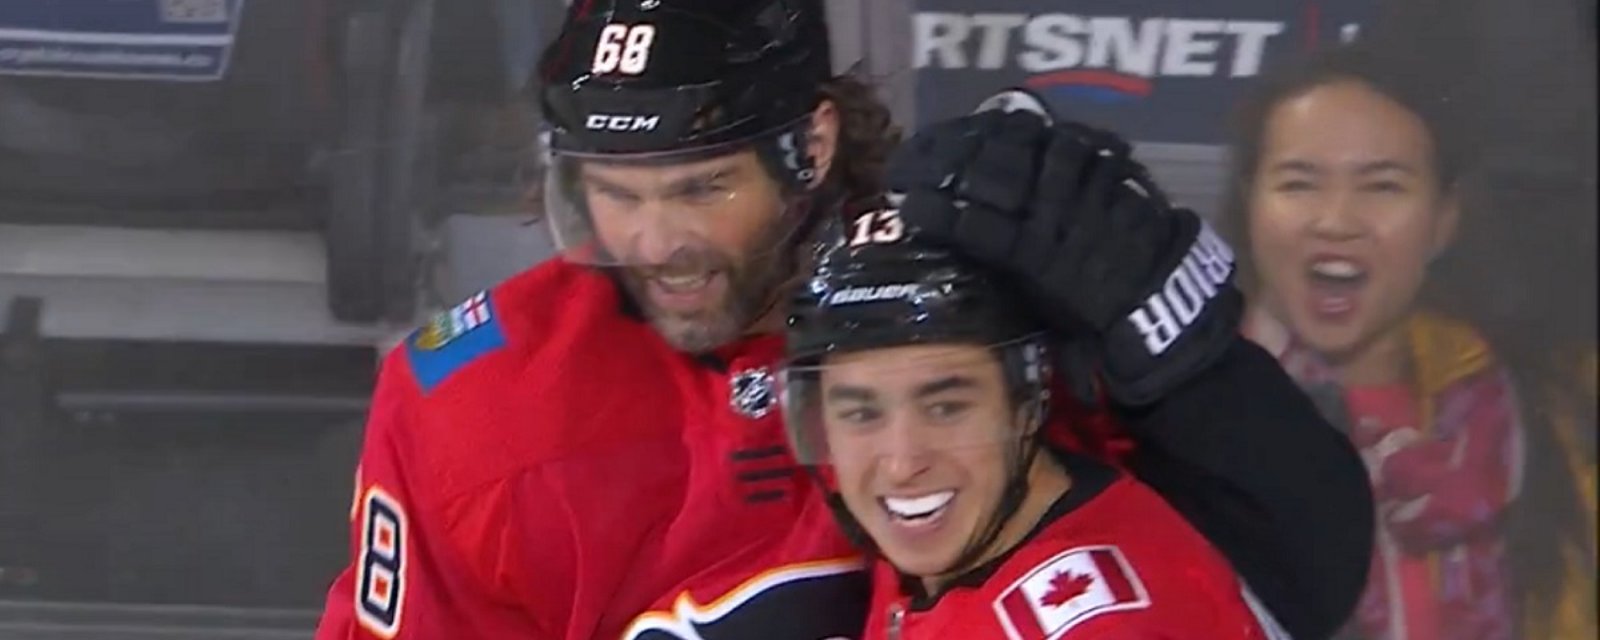 Jaromir Jagr records his first goal as a Calgary Flame.